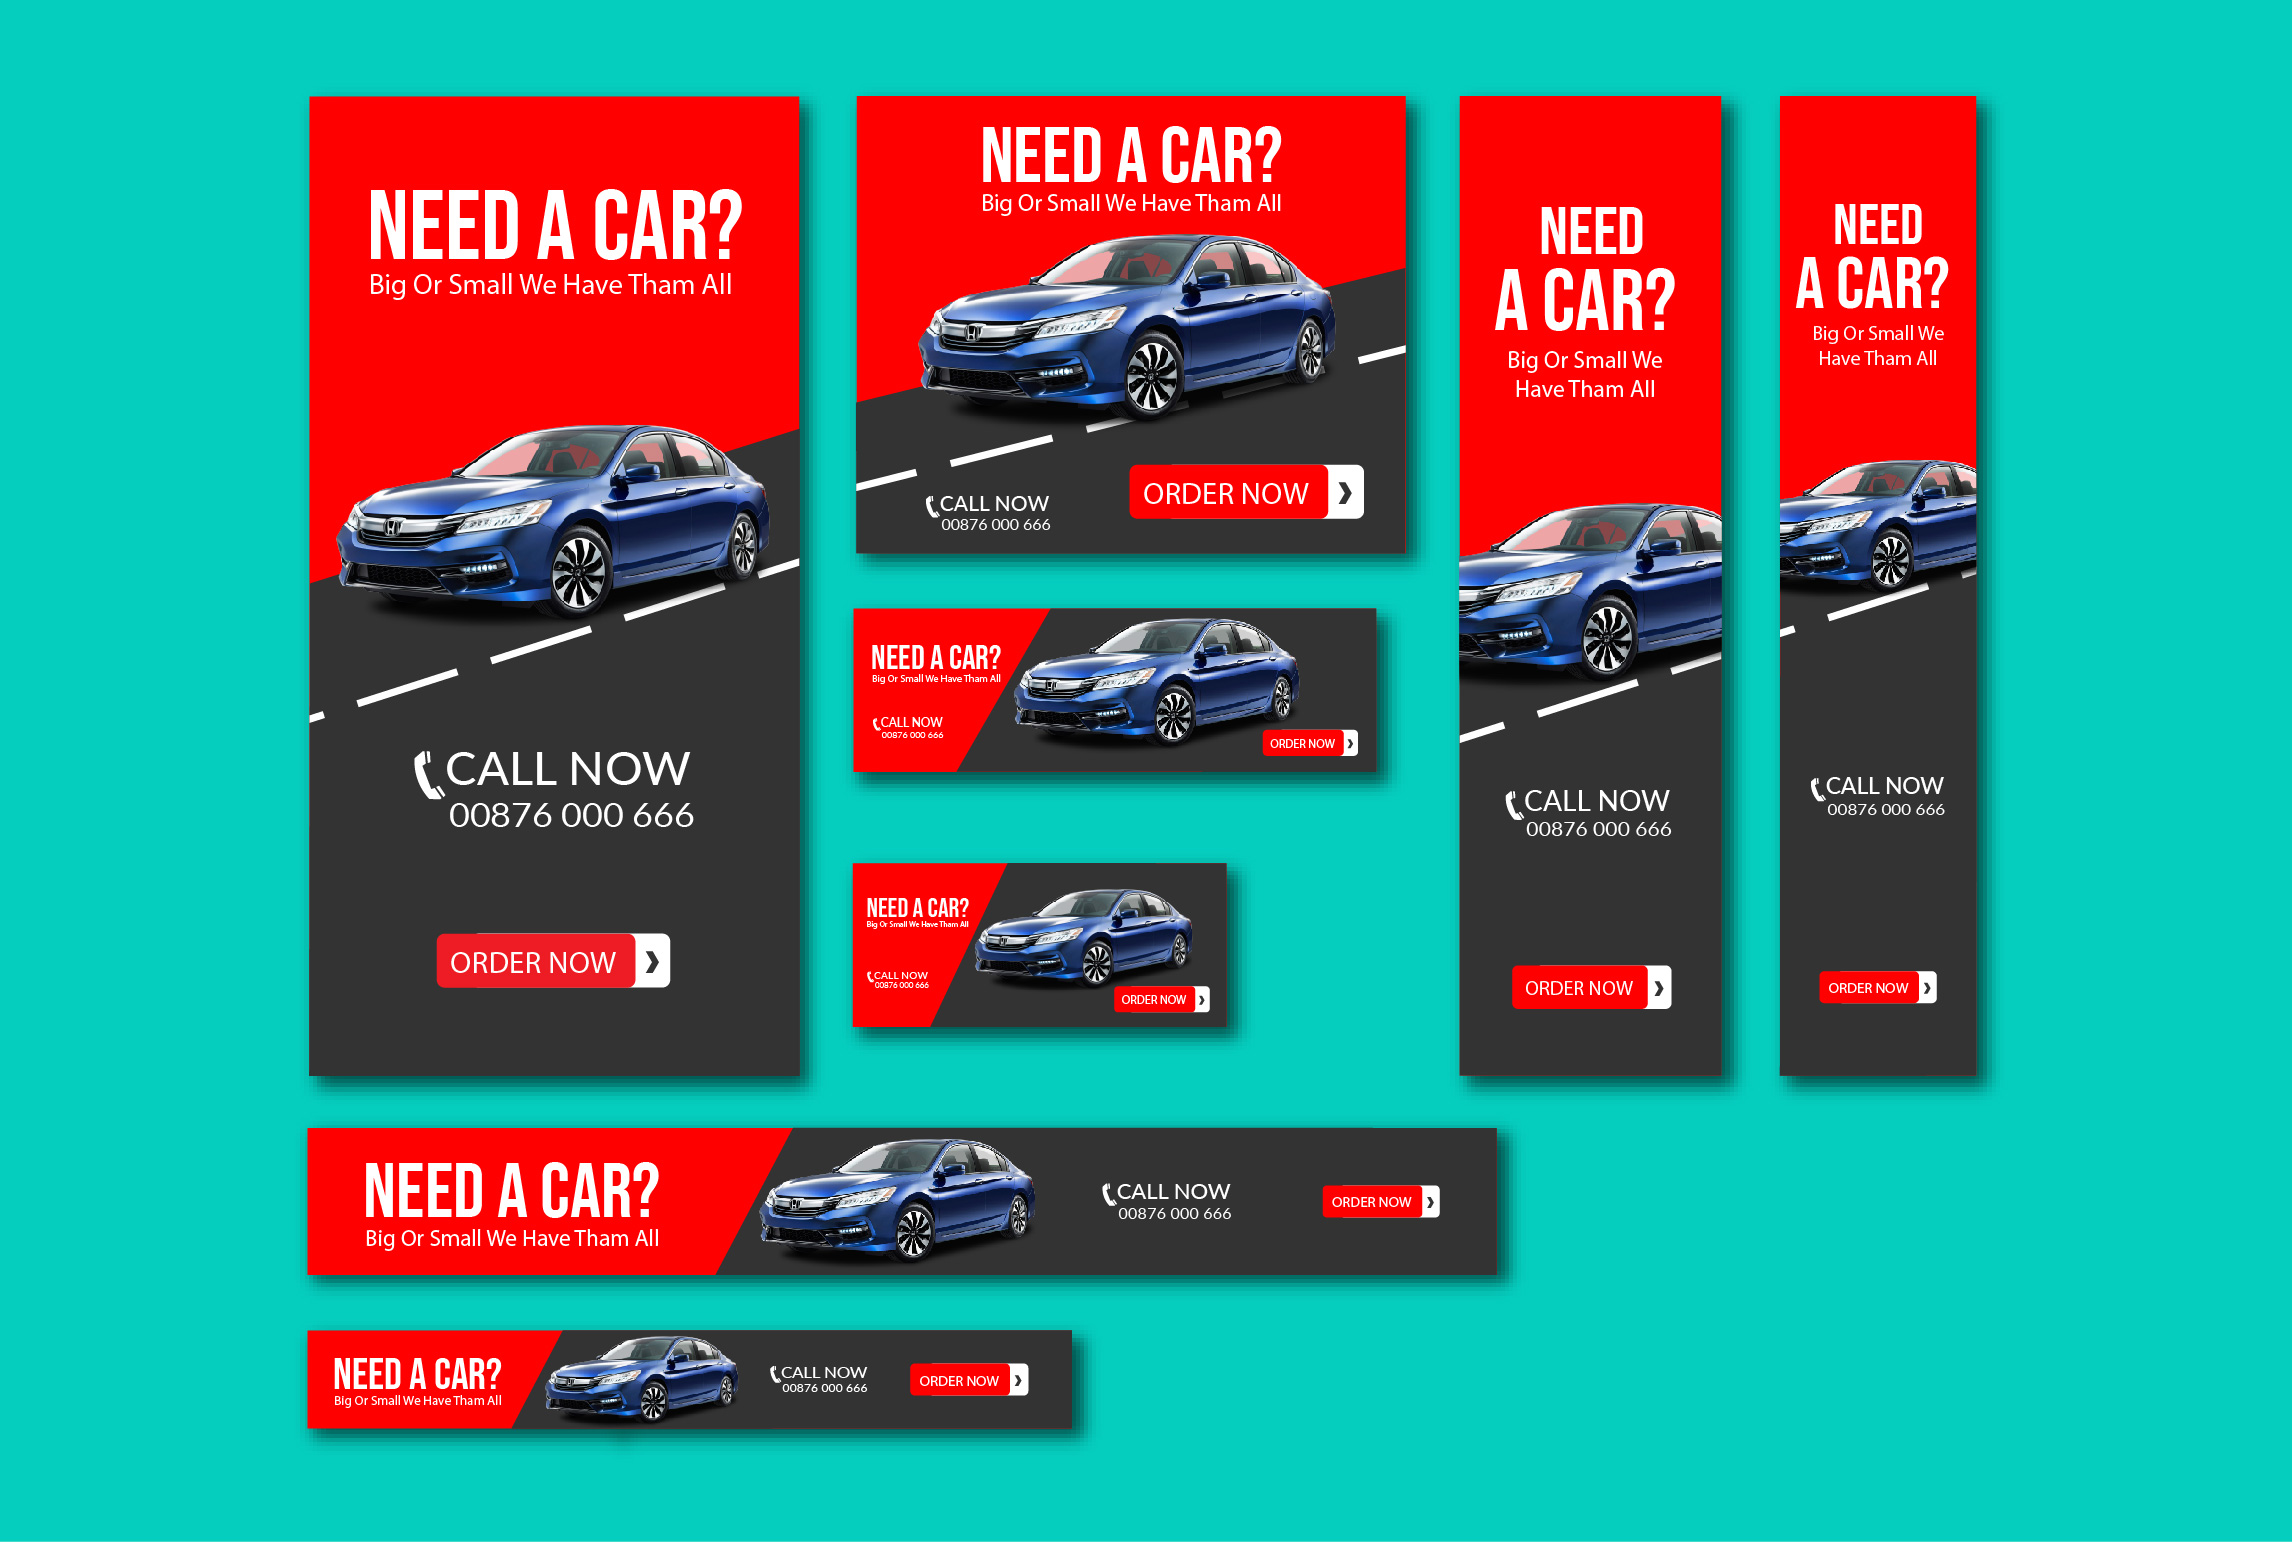 In 3 hours design HTML5 animated banner ads that get more sales